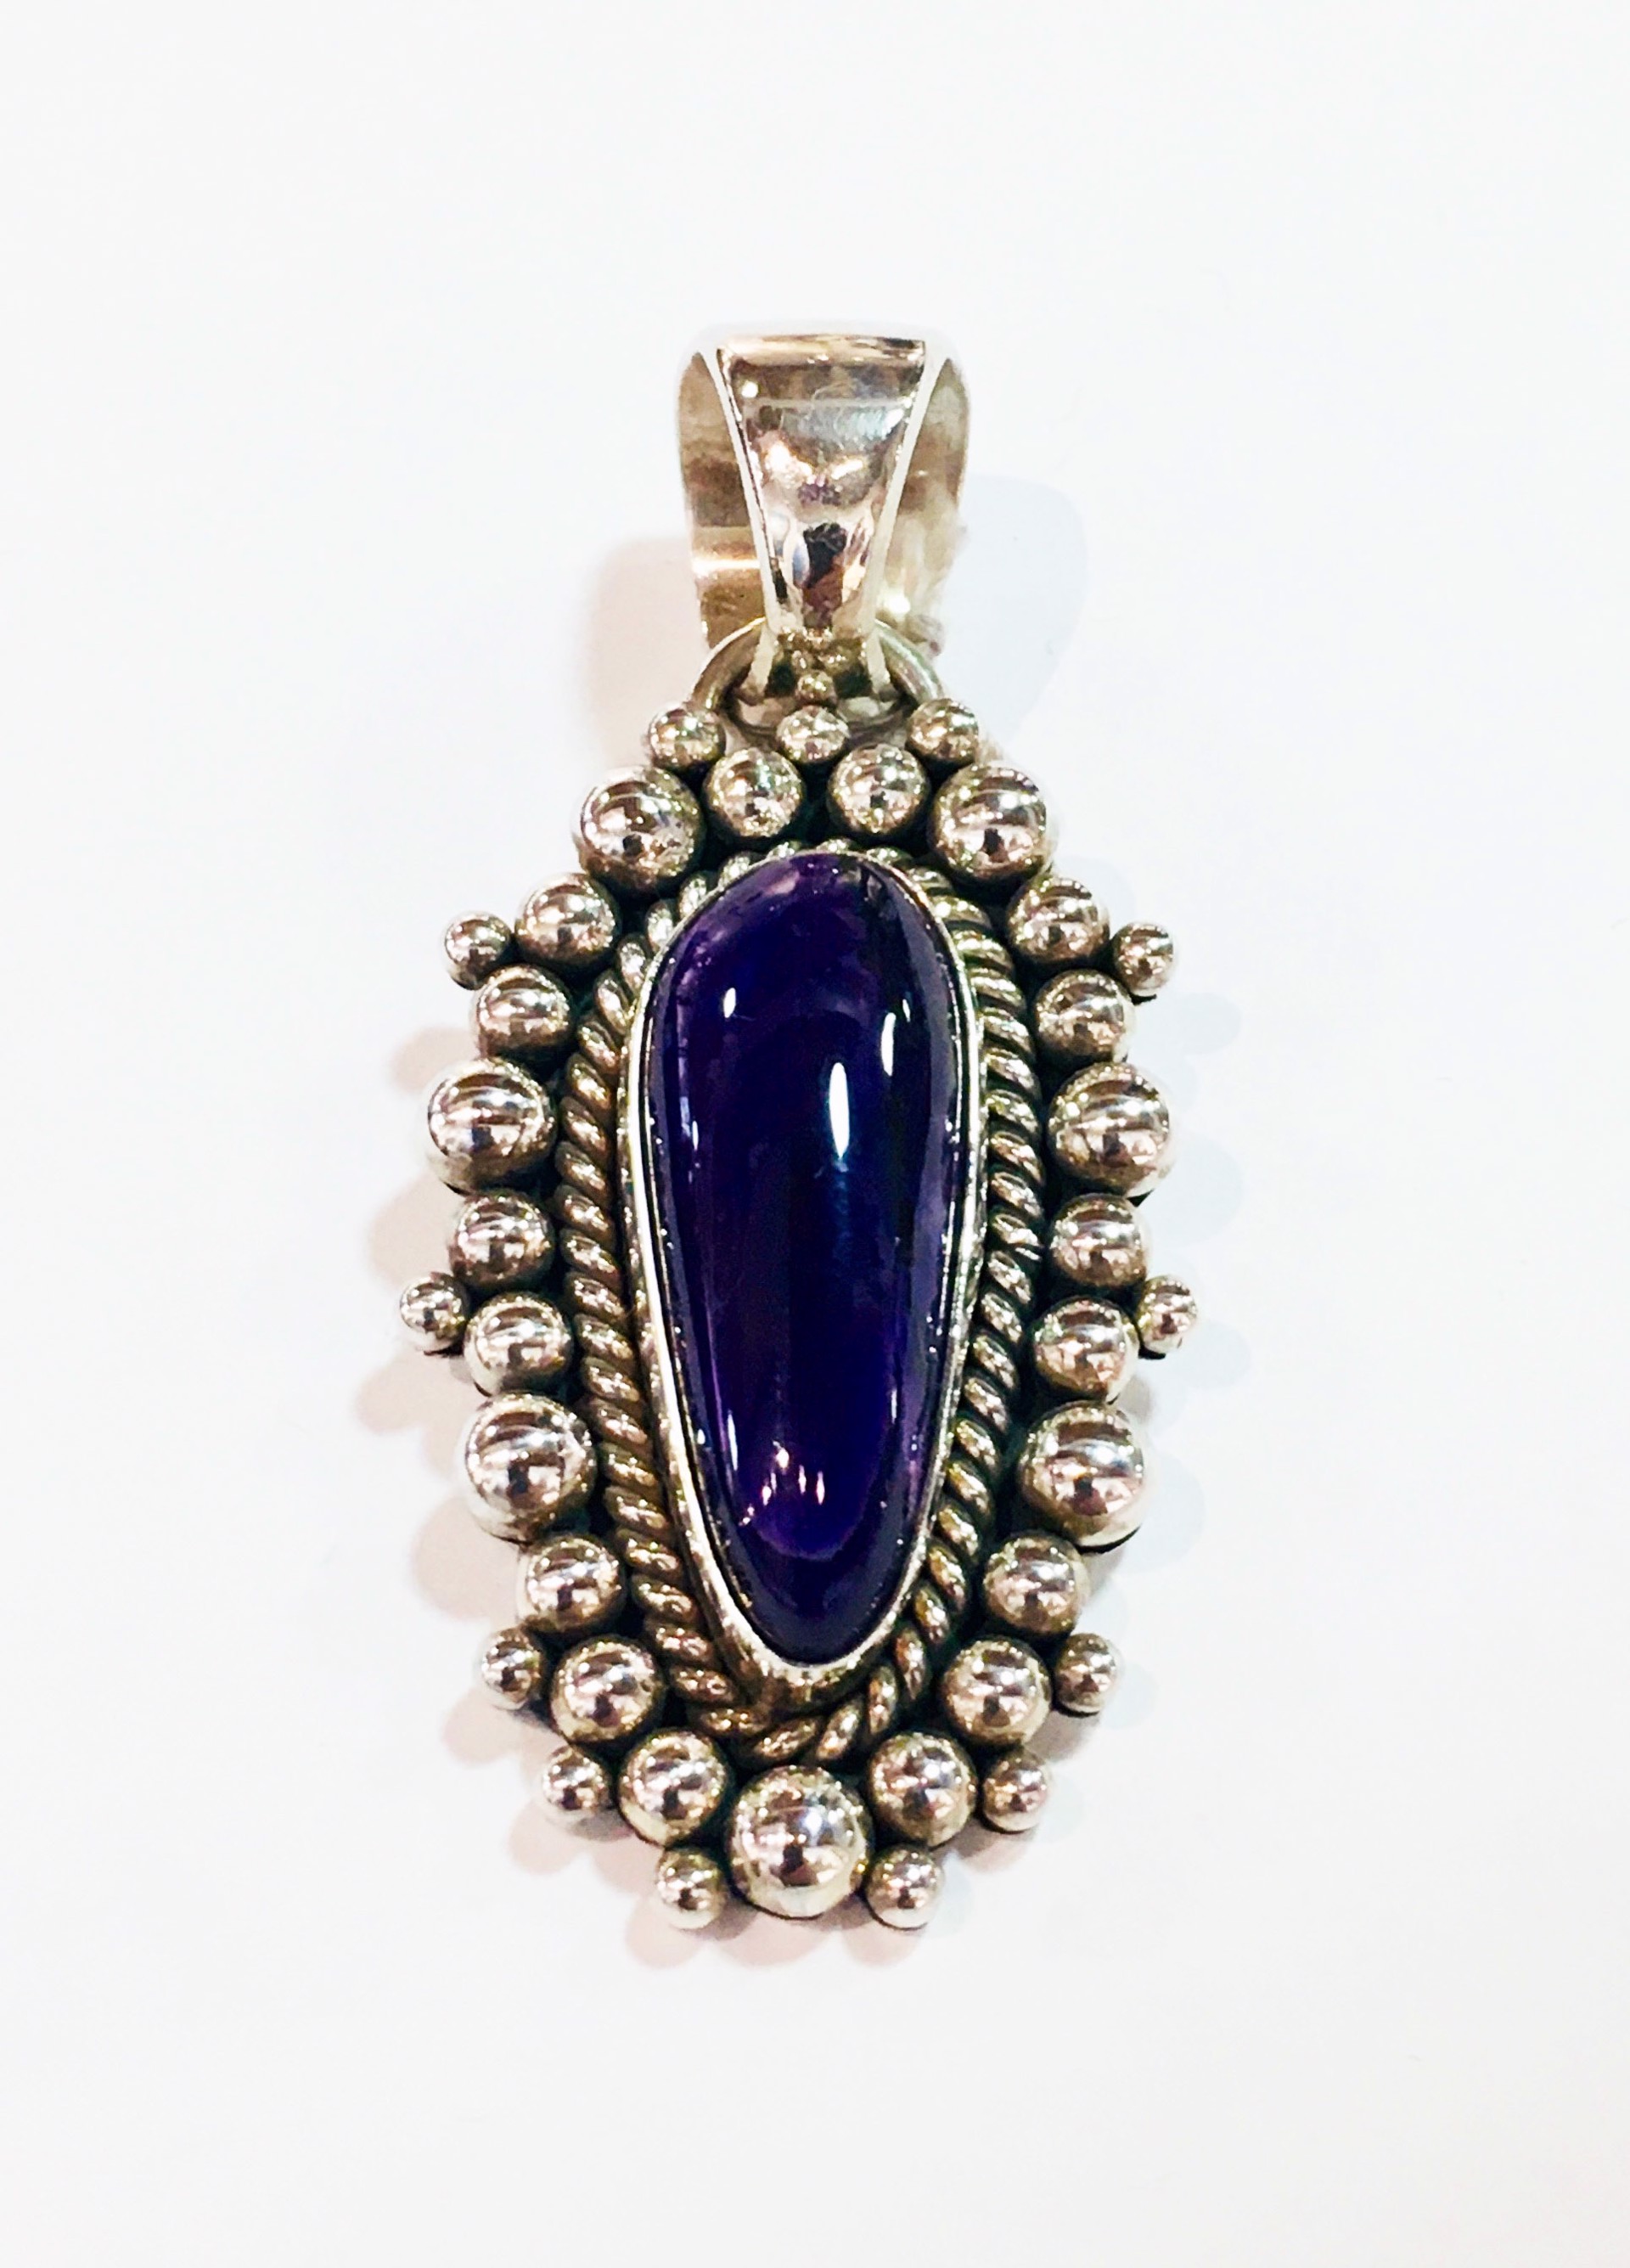 Sugilite and Sterling Silver Pendant by ARTIE YELLOWHORSE